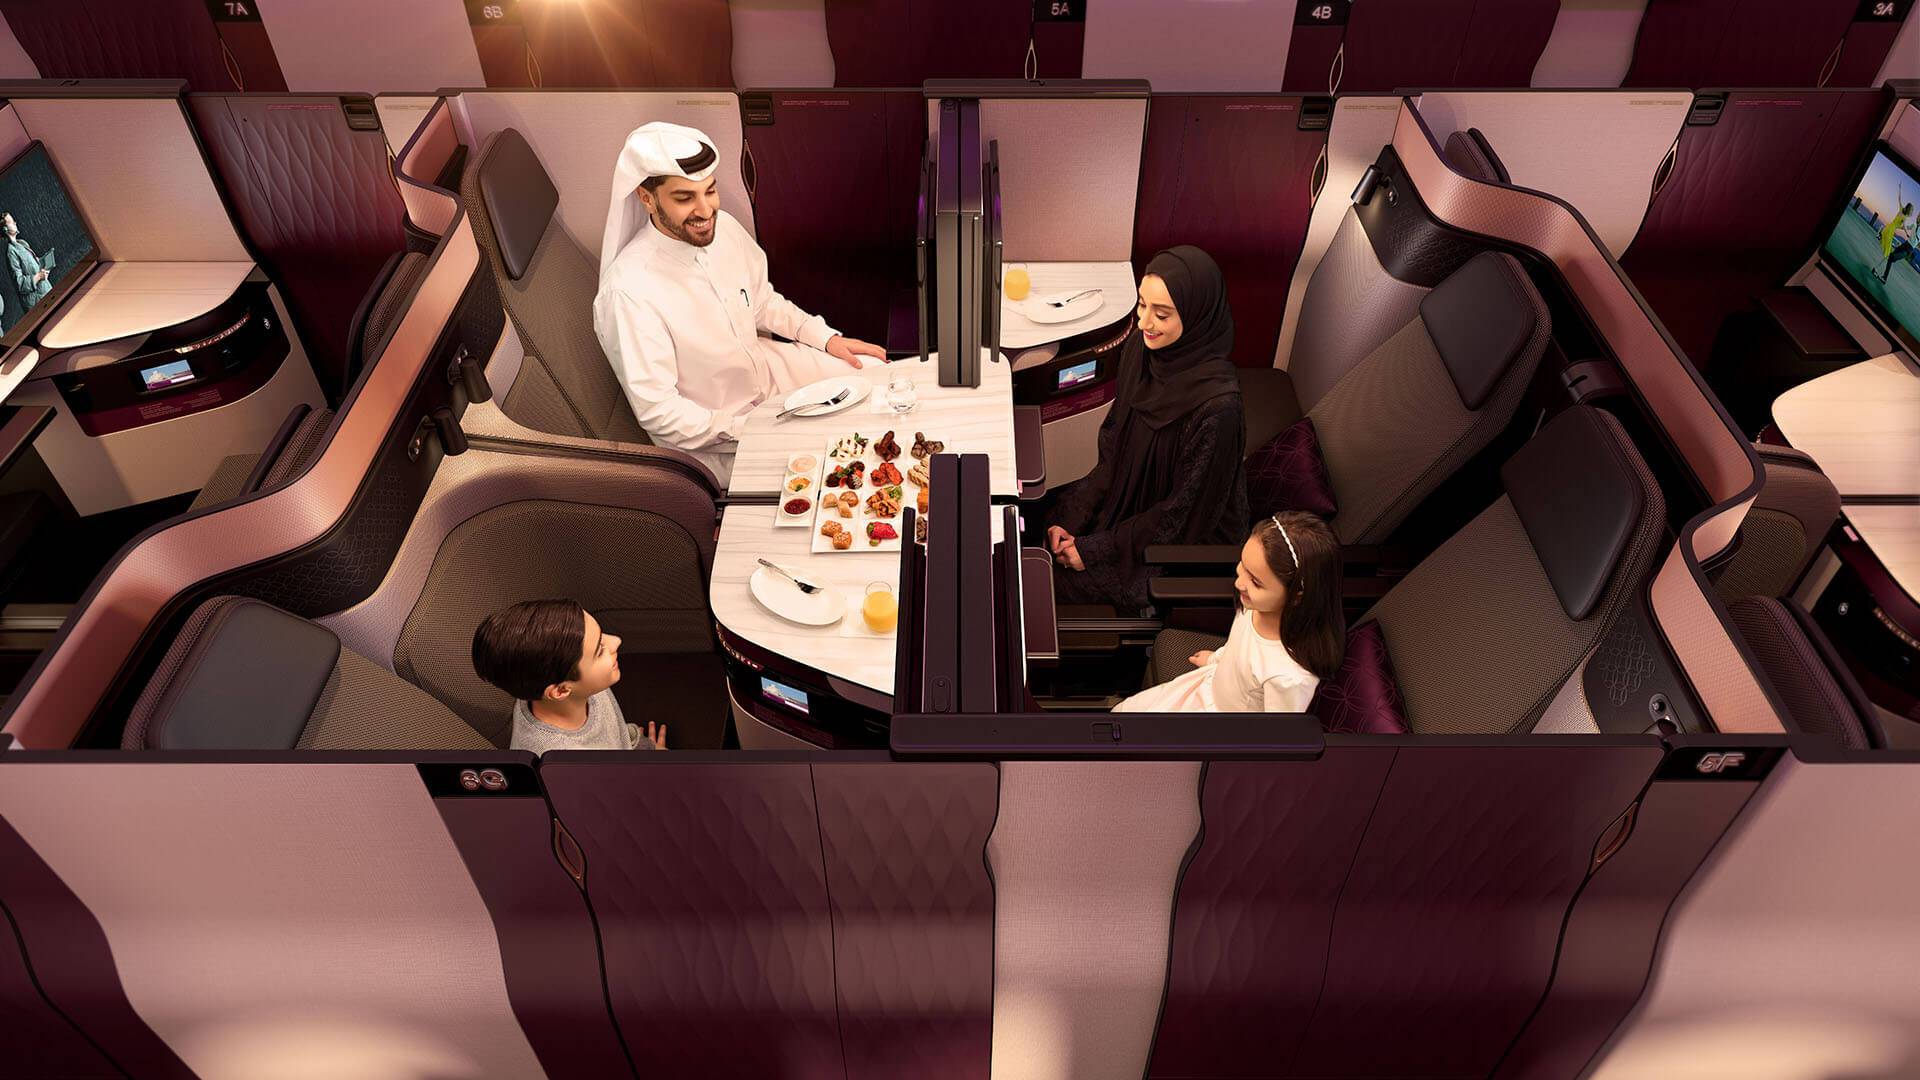 A family eats dinner together in the QSuite Business Class cabin. Four seats facing each other and a removable panel allow this unique social setting